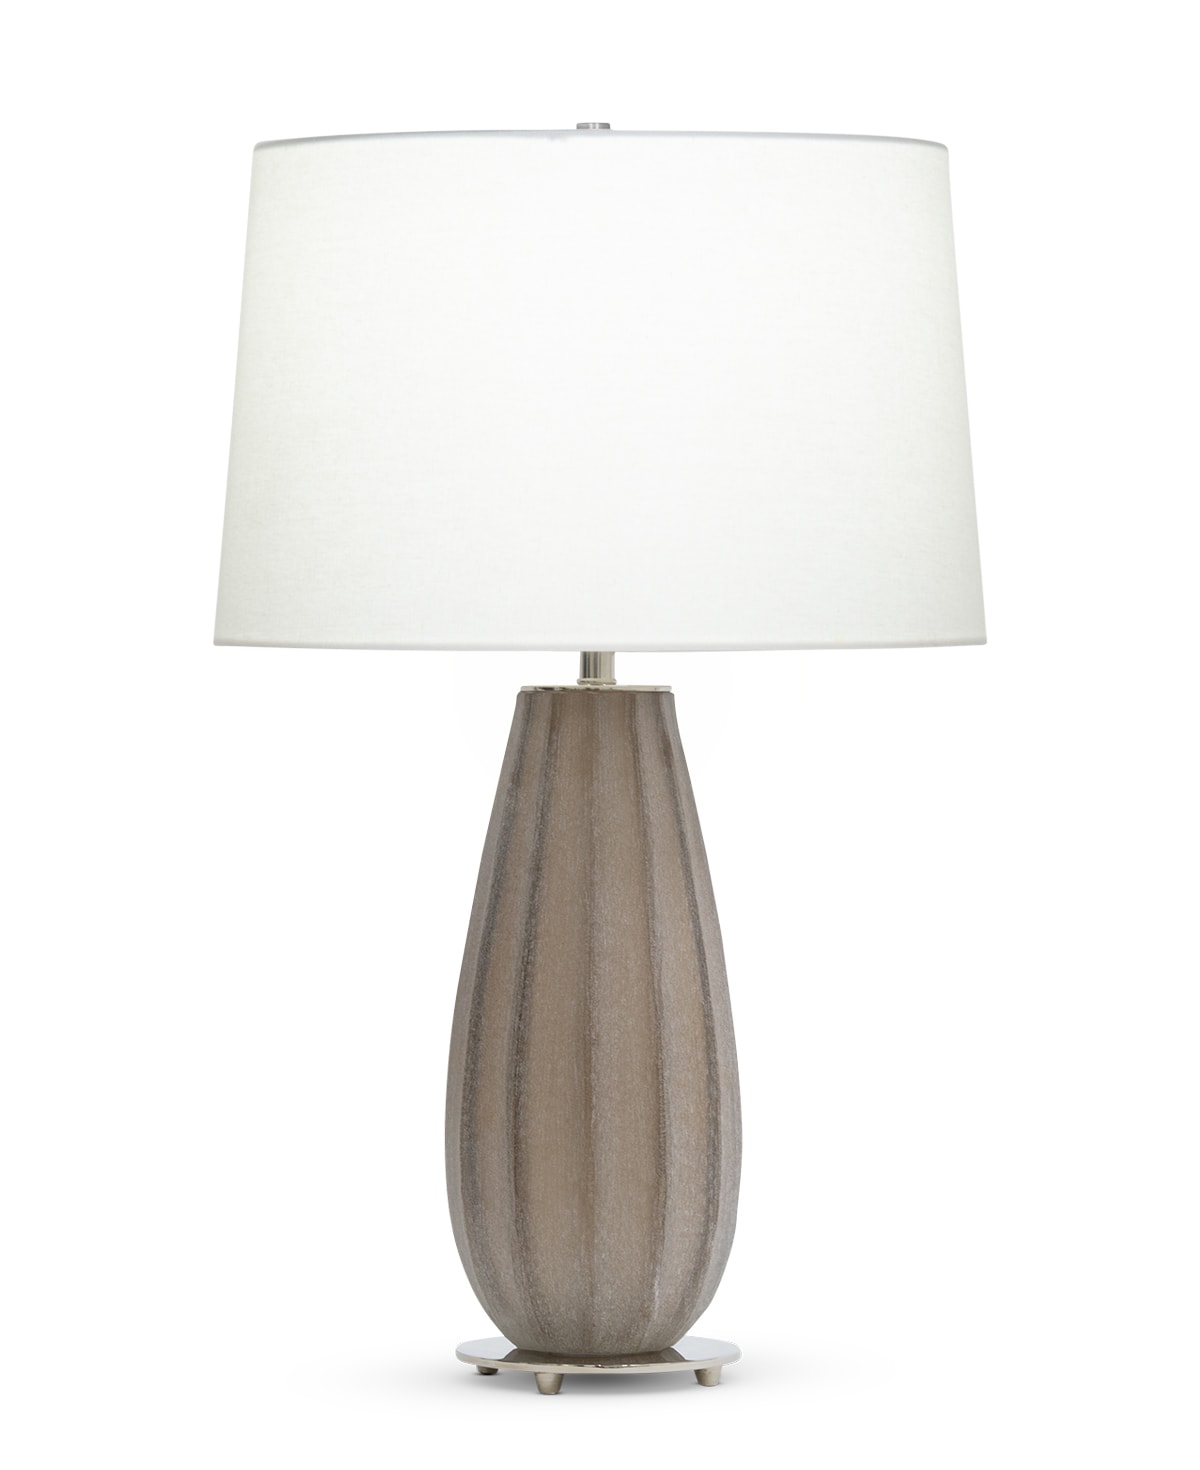 FlowDecor Danforth Table Lamp in glass with beige and off-white linen tapered drum shade (# 4578)